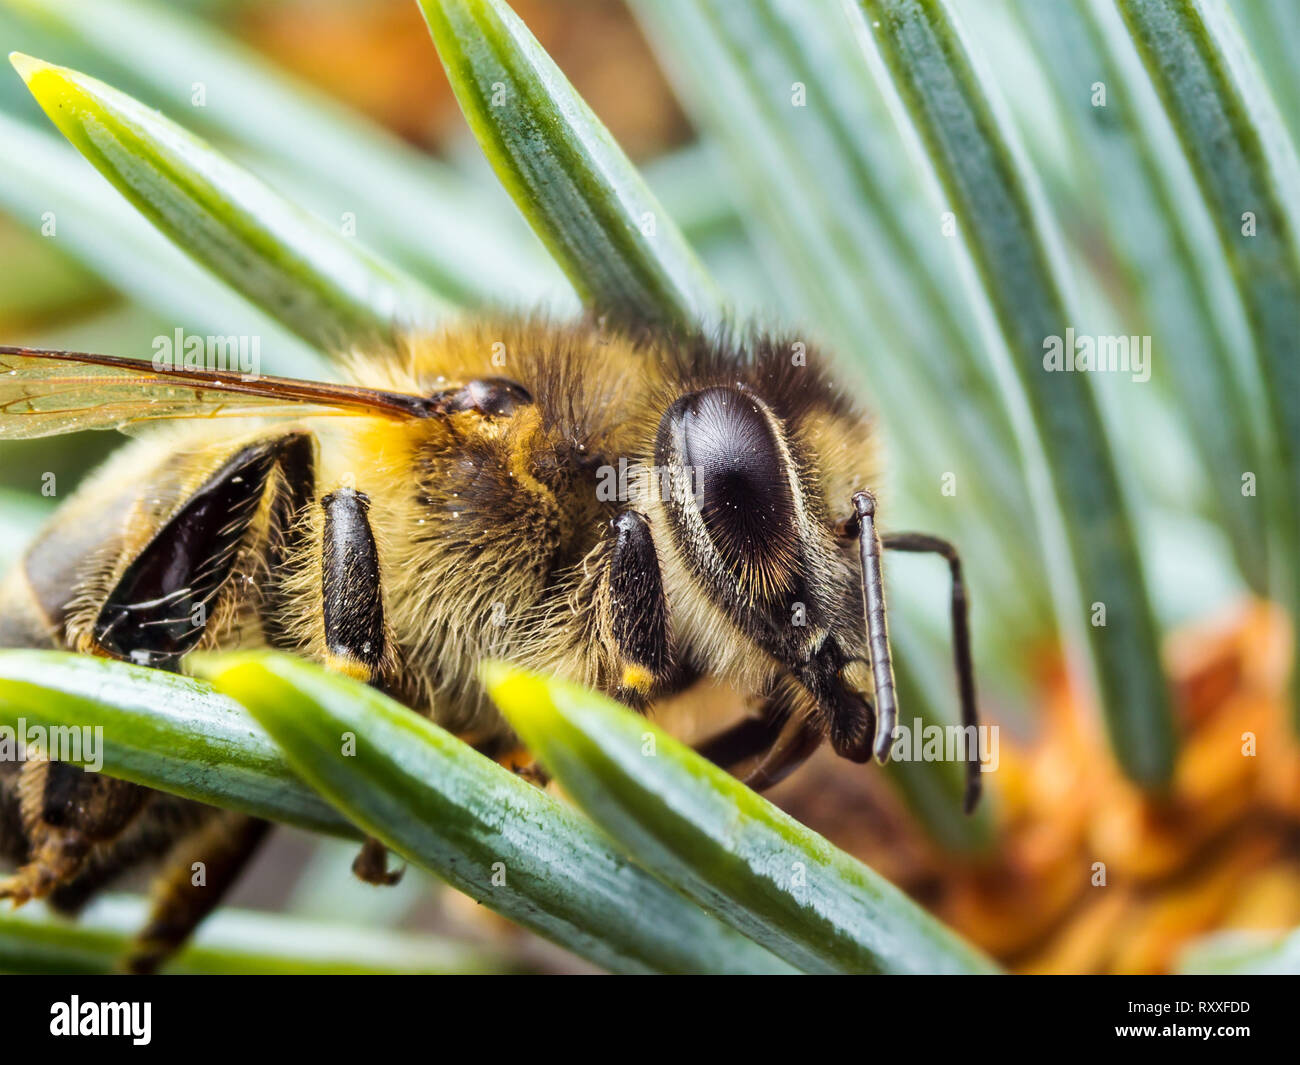 Honey Bee Insect on Fir Tree Stock Photo